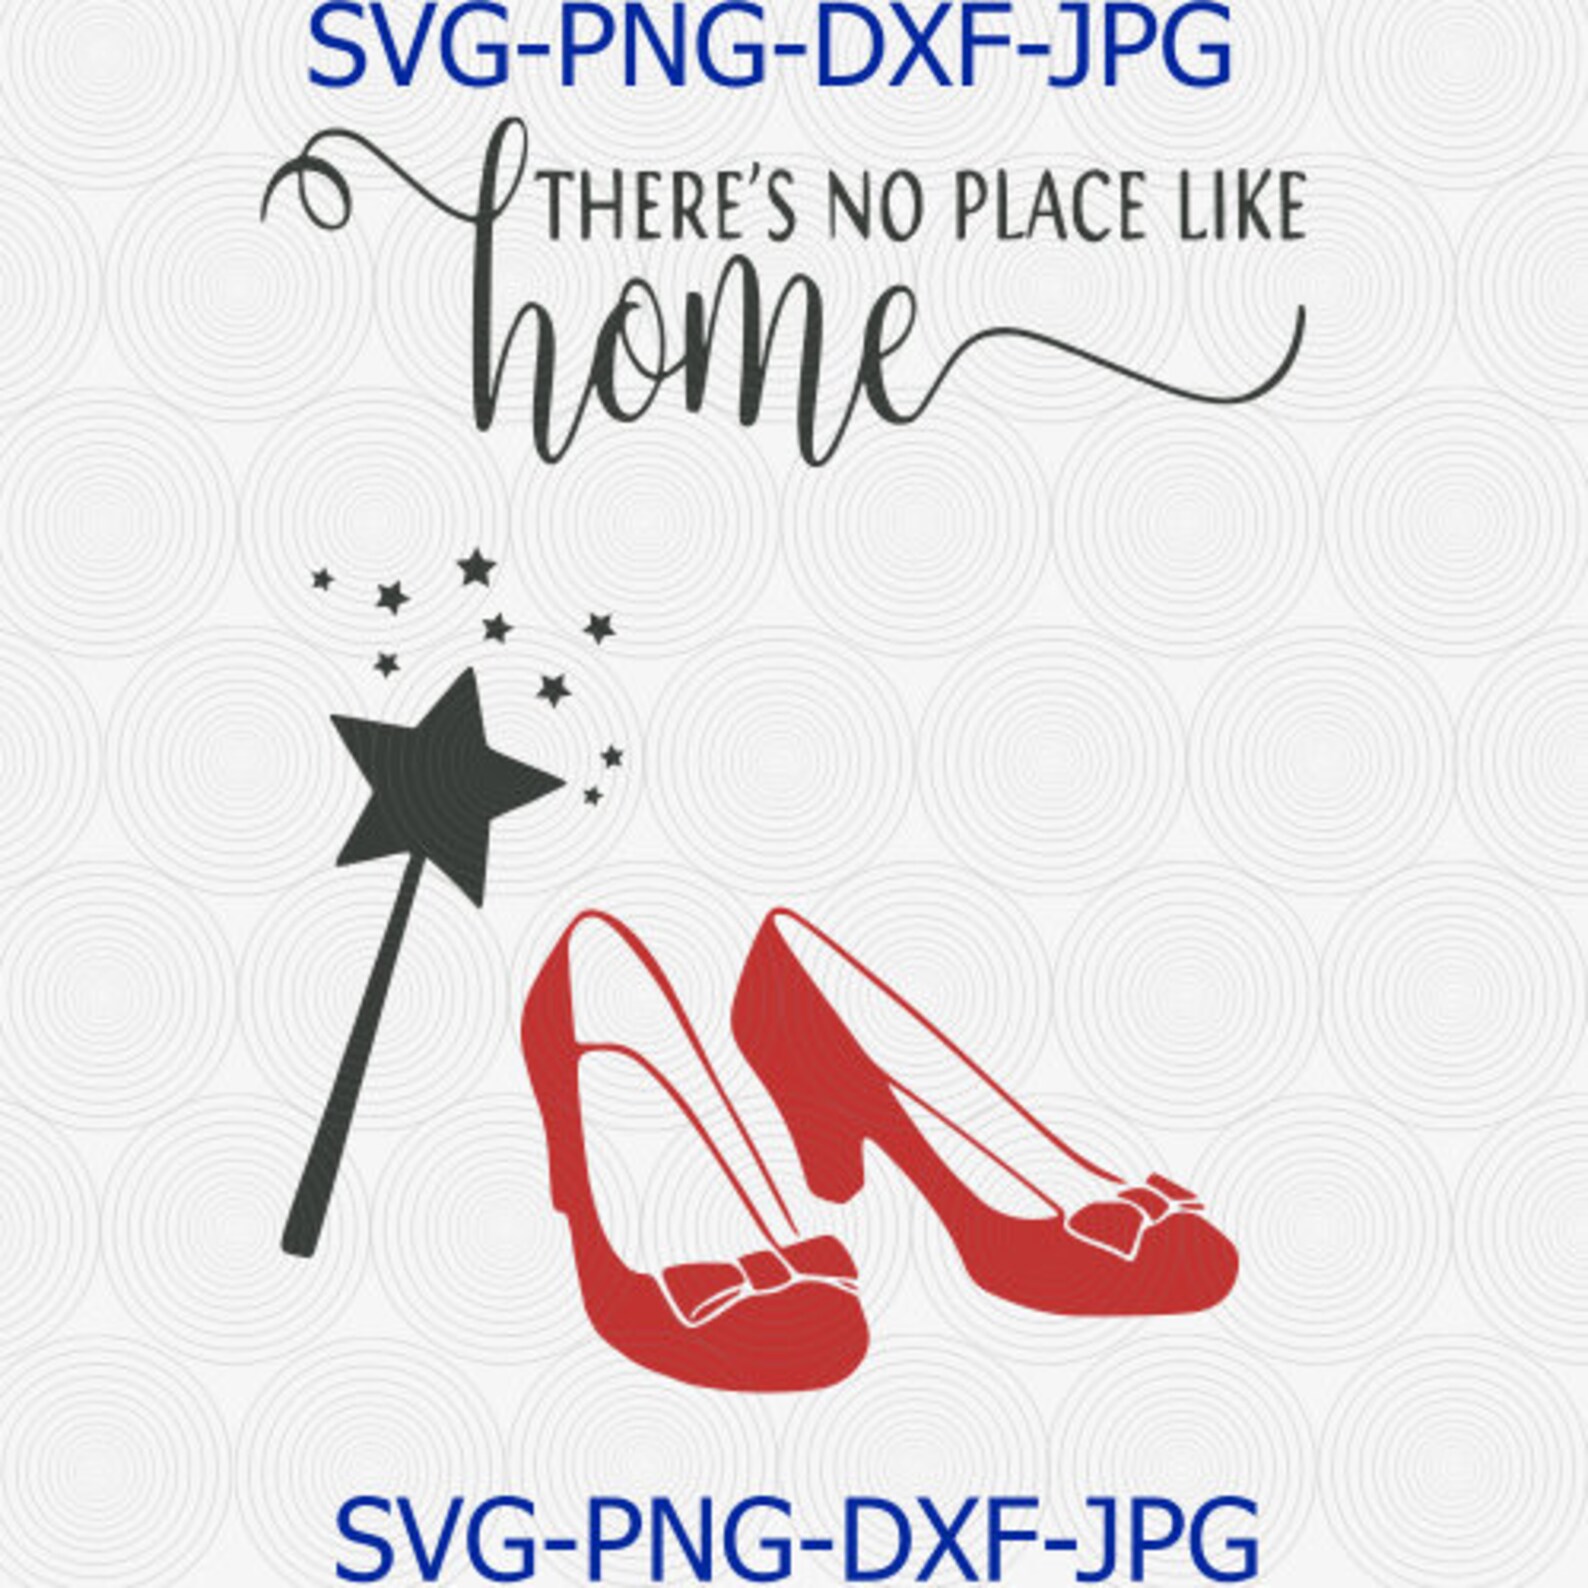 No place like home svgruby red slippers svg wizard of oz | Etsy